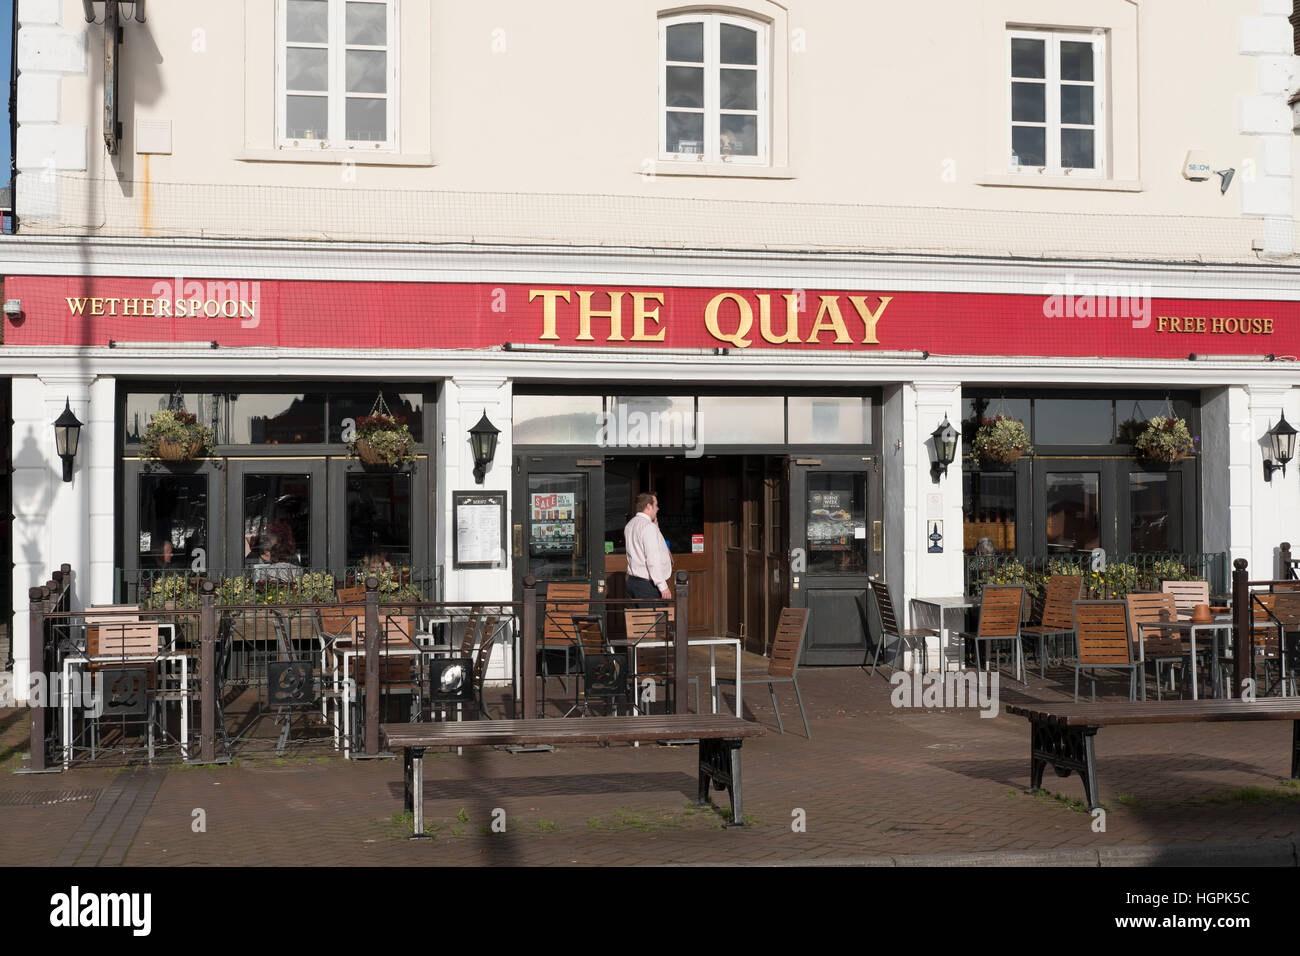 Wetherspoons Pub. The Quay Public House on the Quay in Poole Dorset Stock Photo